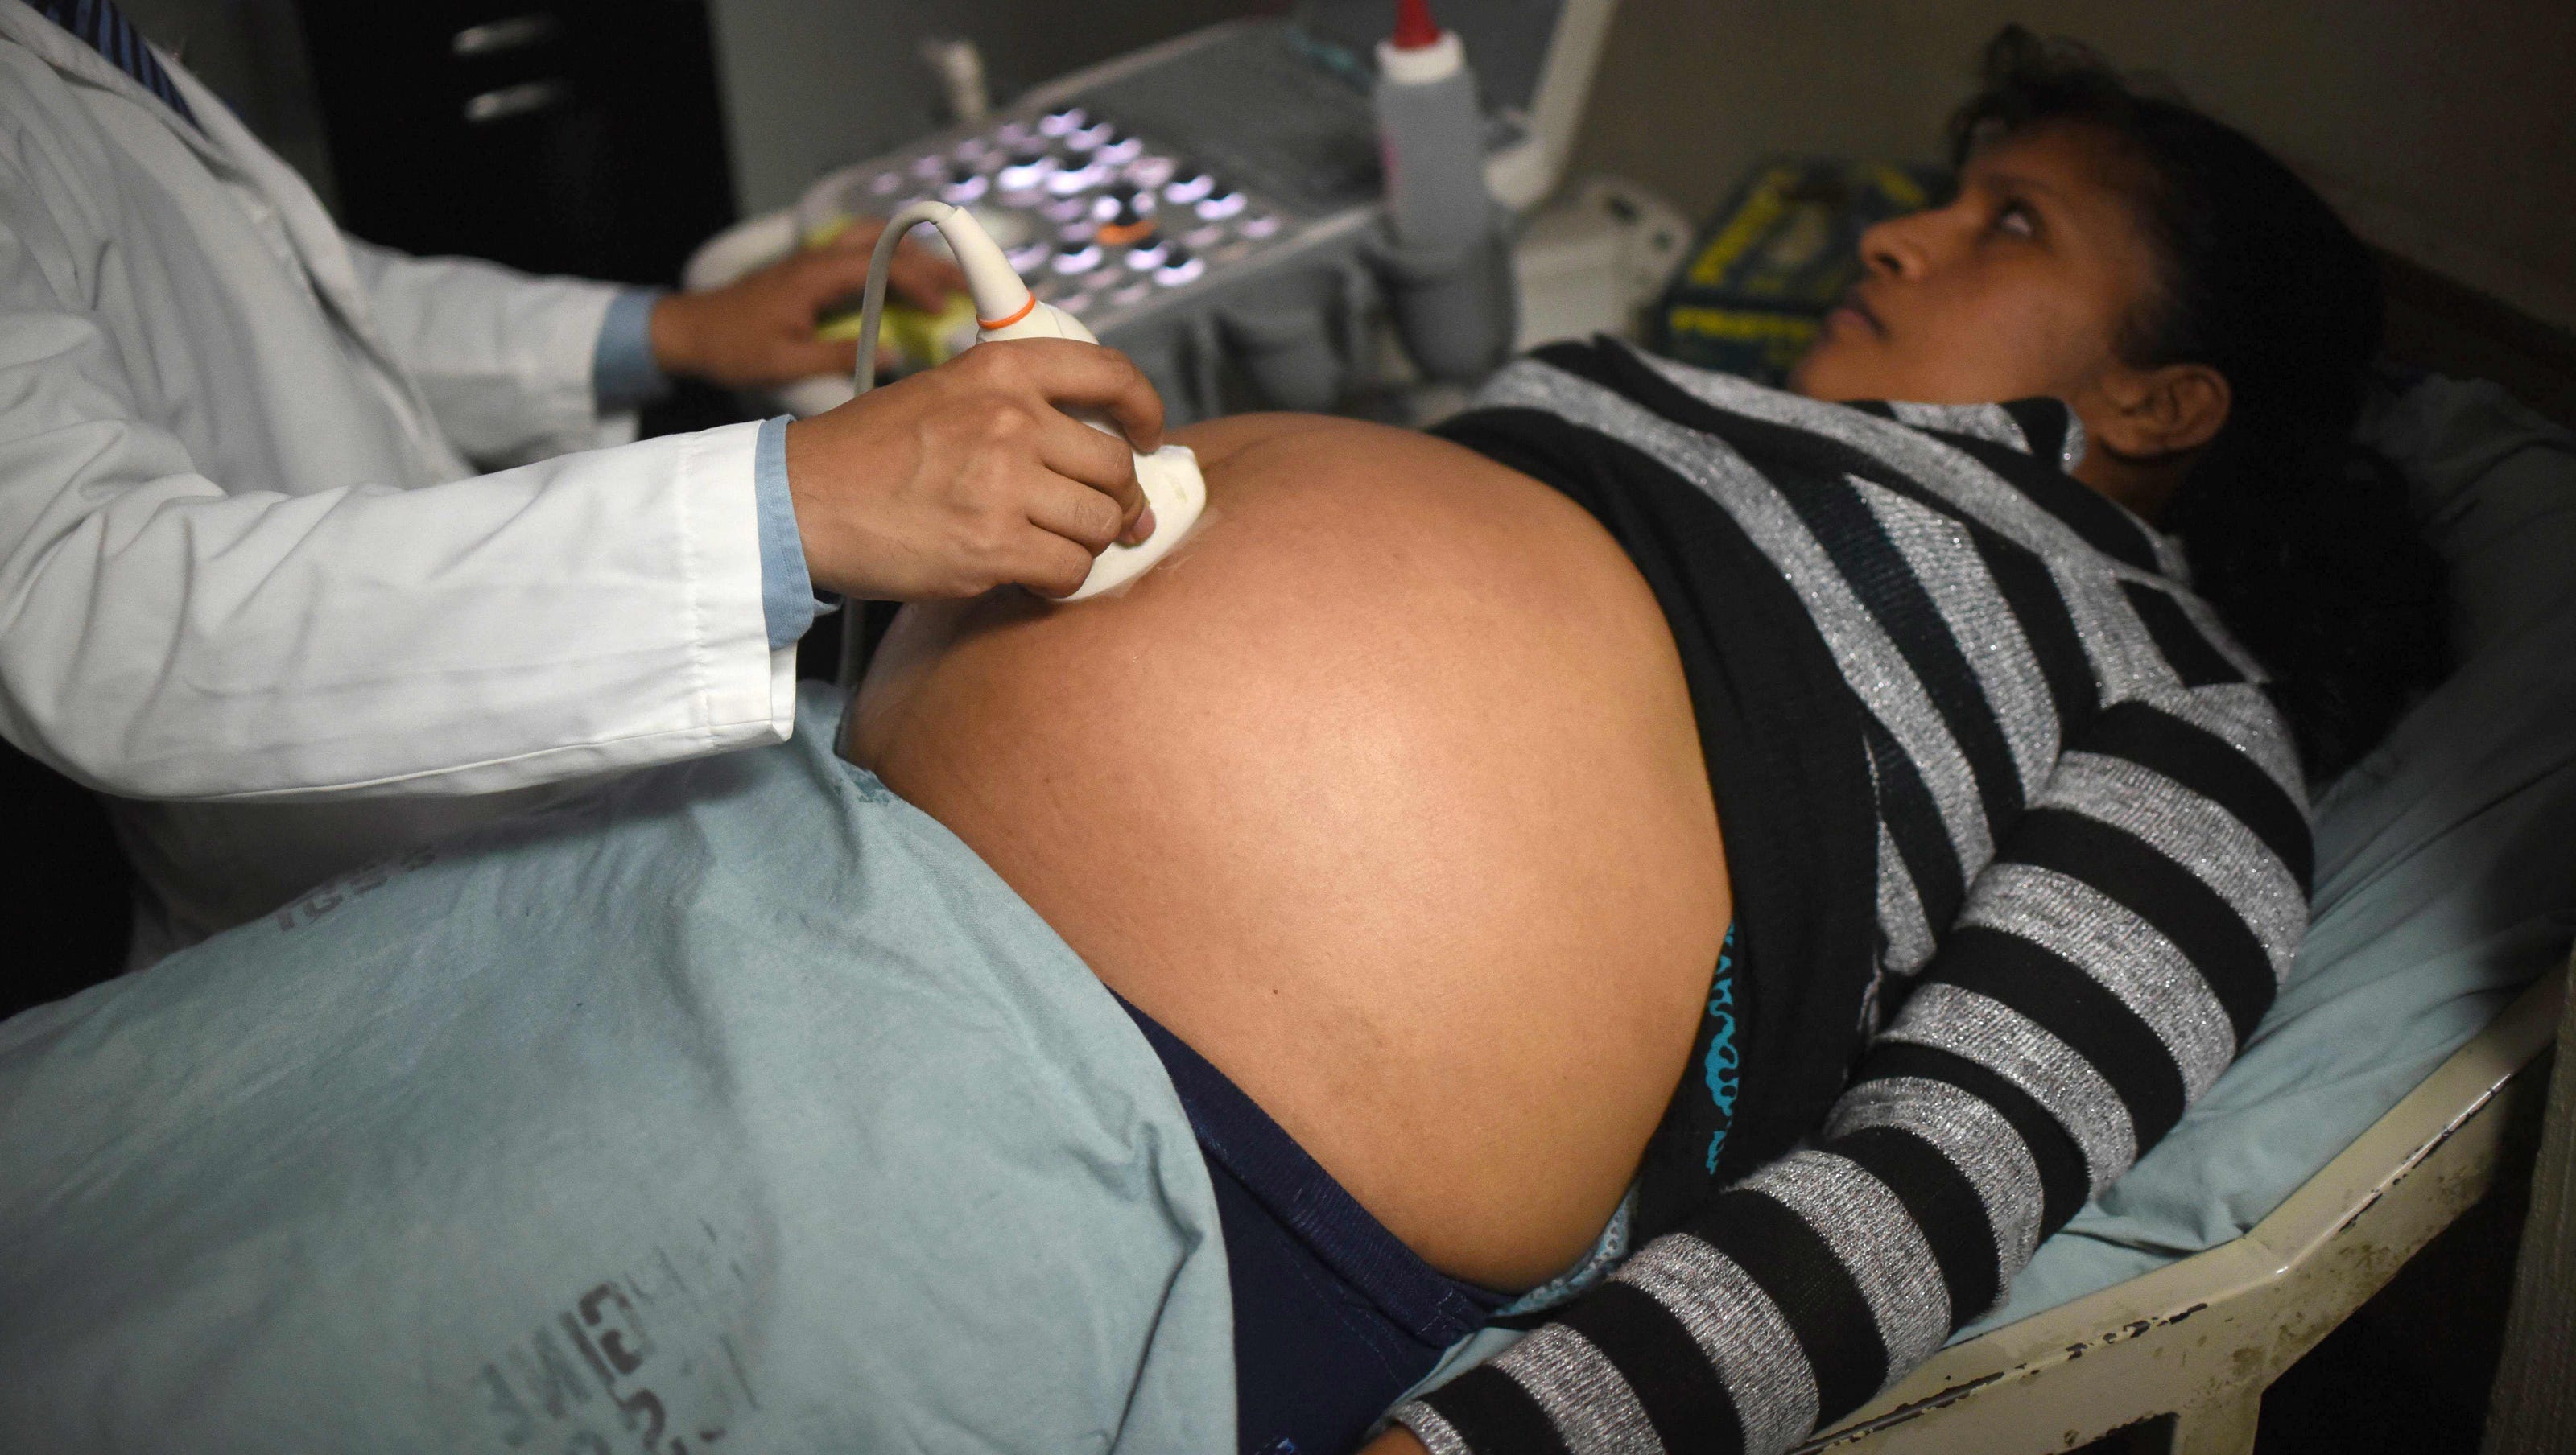 Cdc All Pregnant Women Should Be Assessed For Zika Exposure